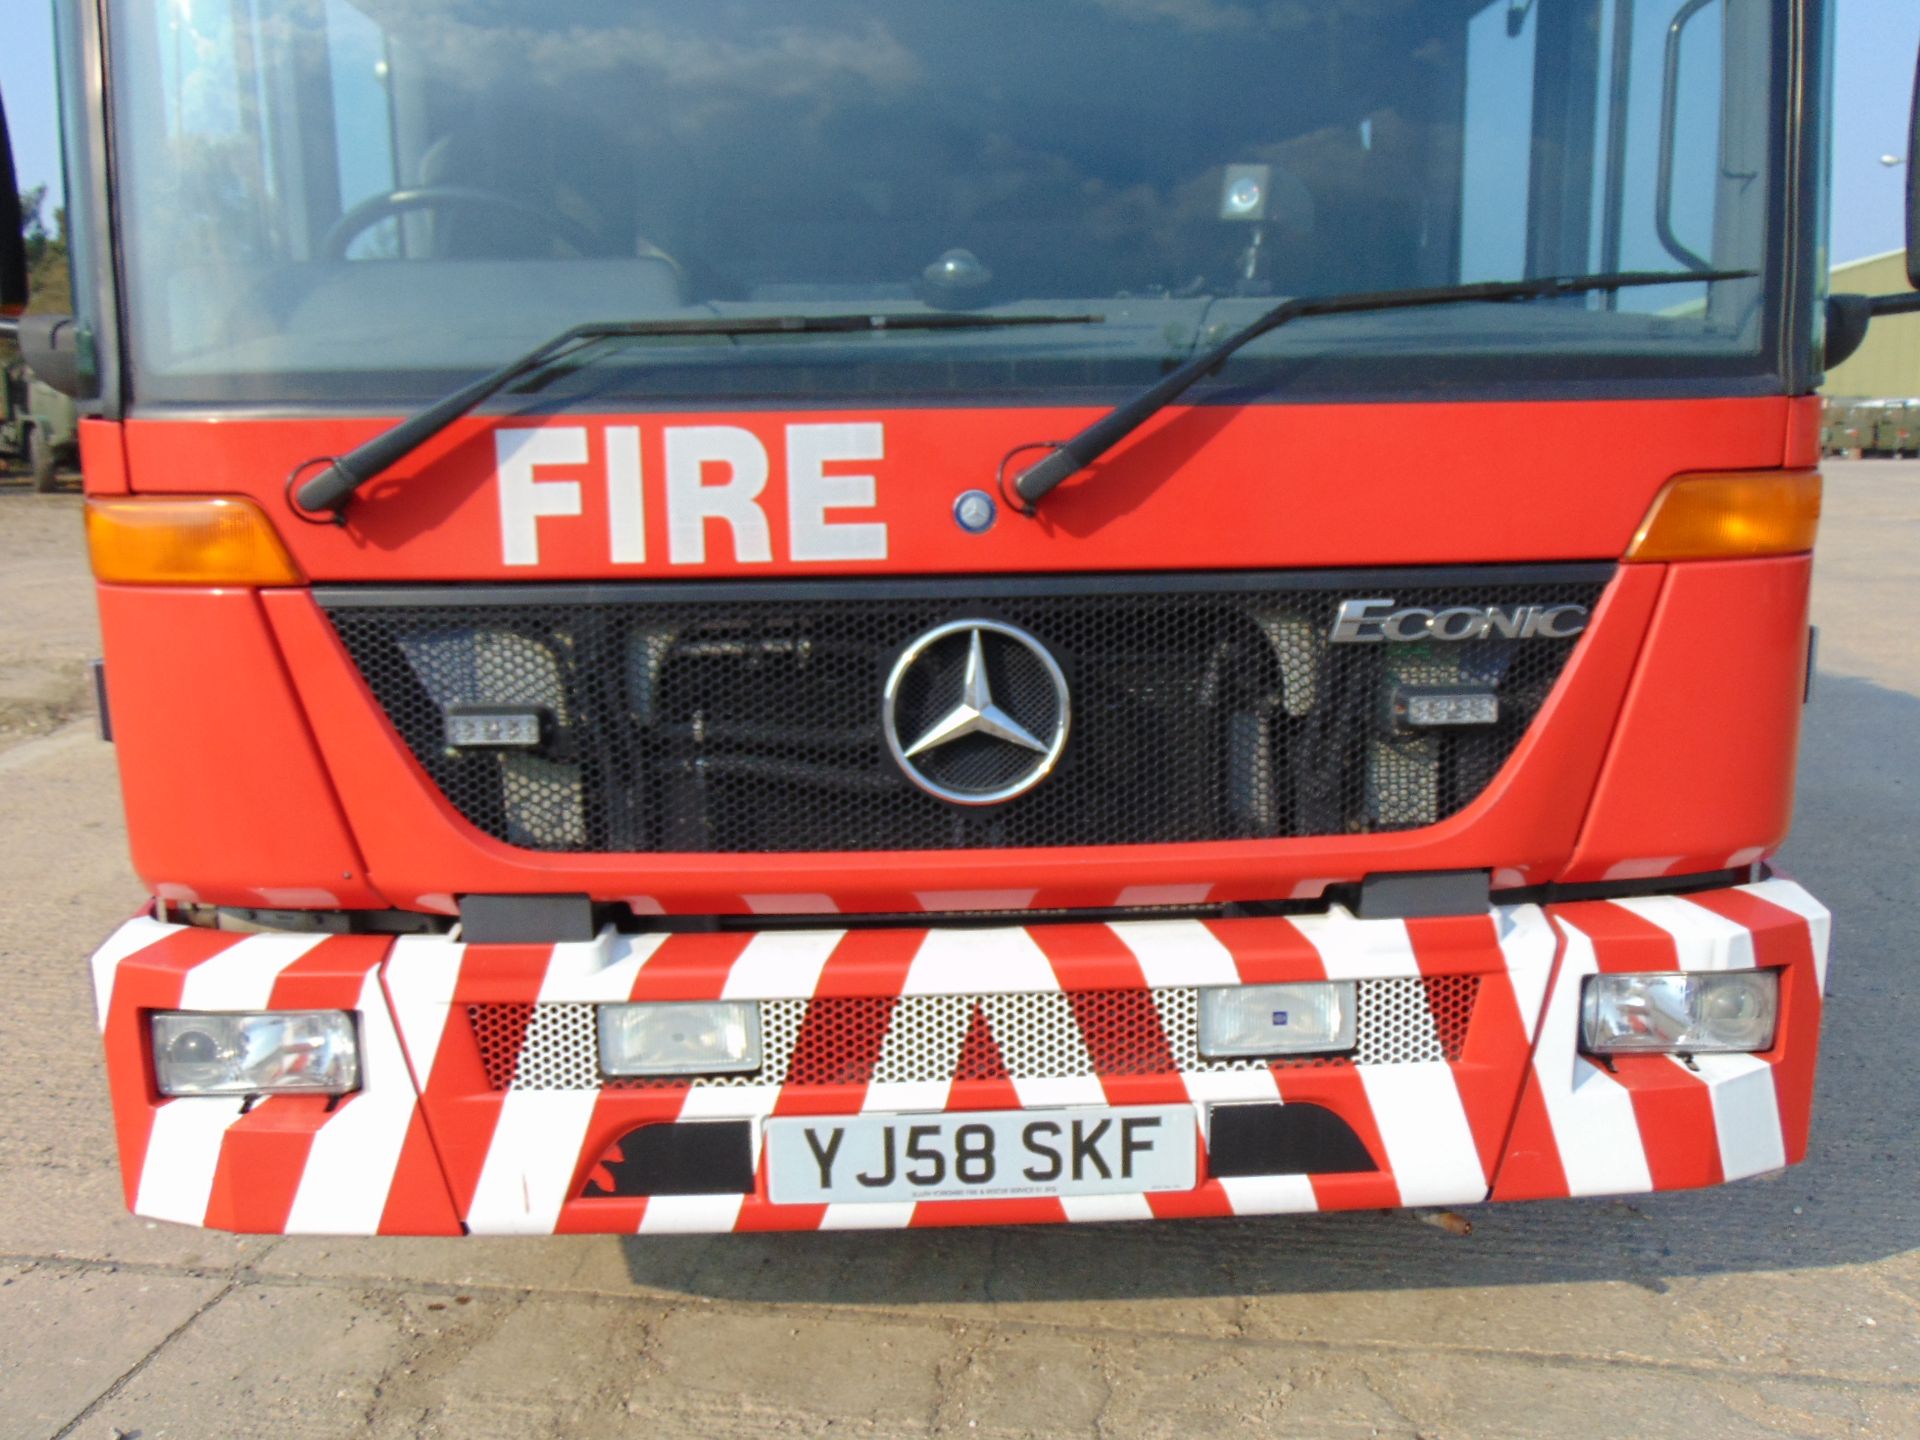 Mercedes Econic 2633 Aerial Rescue Fire Fighting Appliance - Image 56 of 57